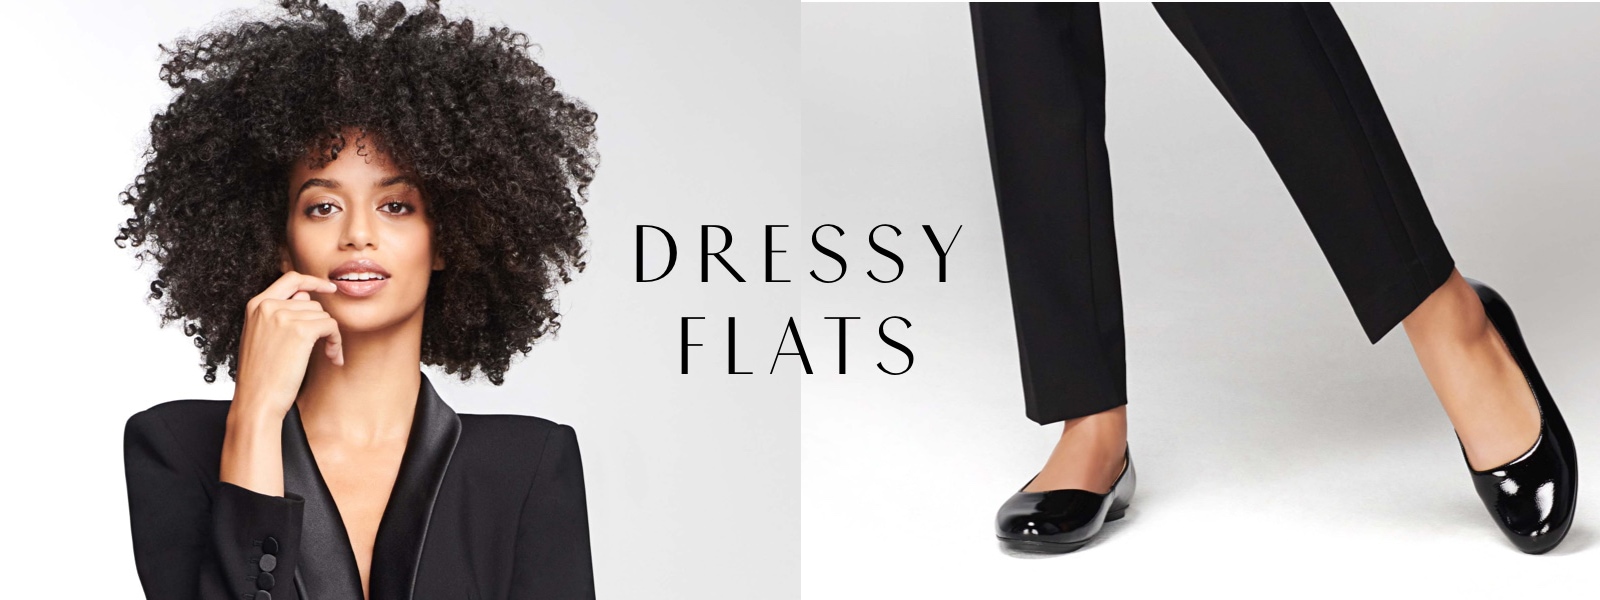 women's dressy flat shoes for any occasion